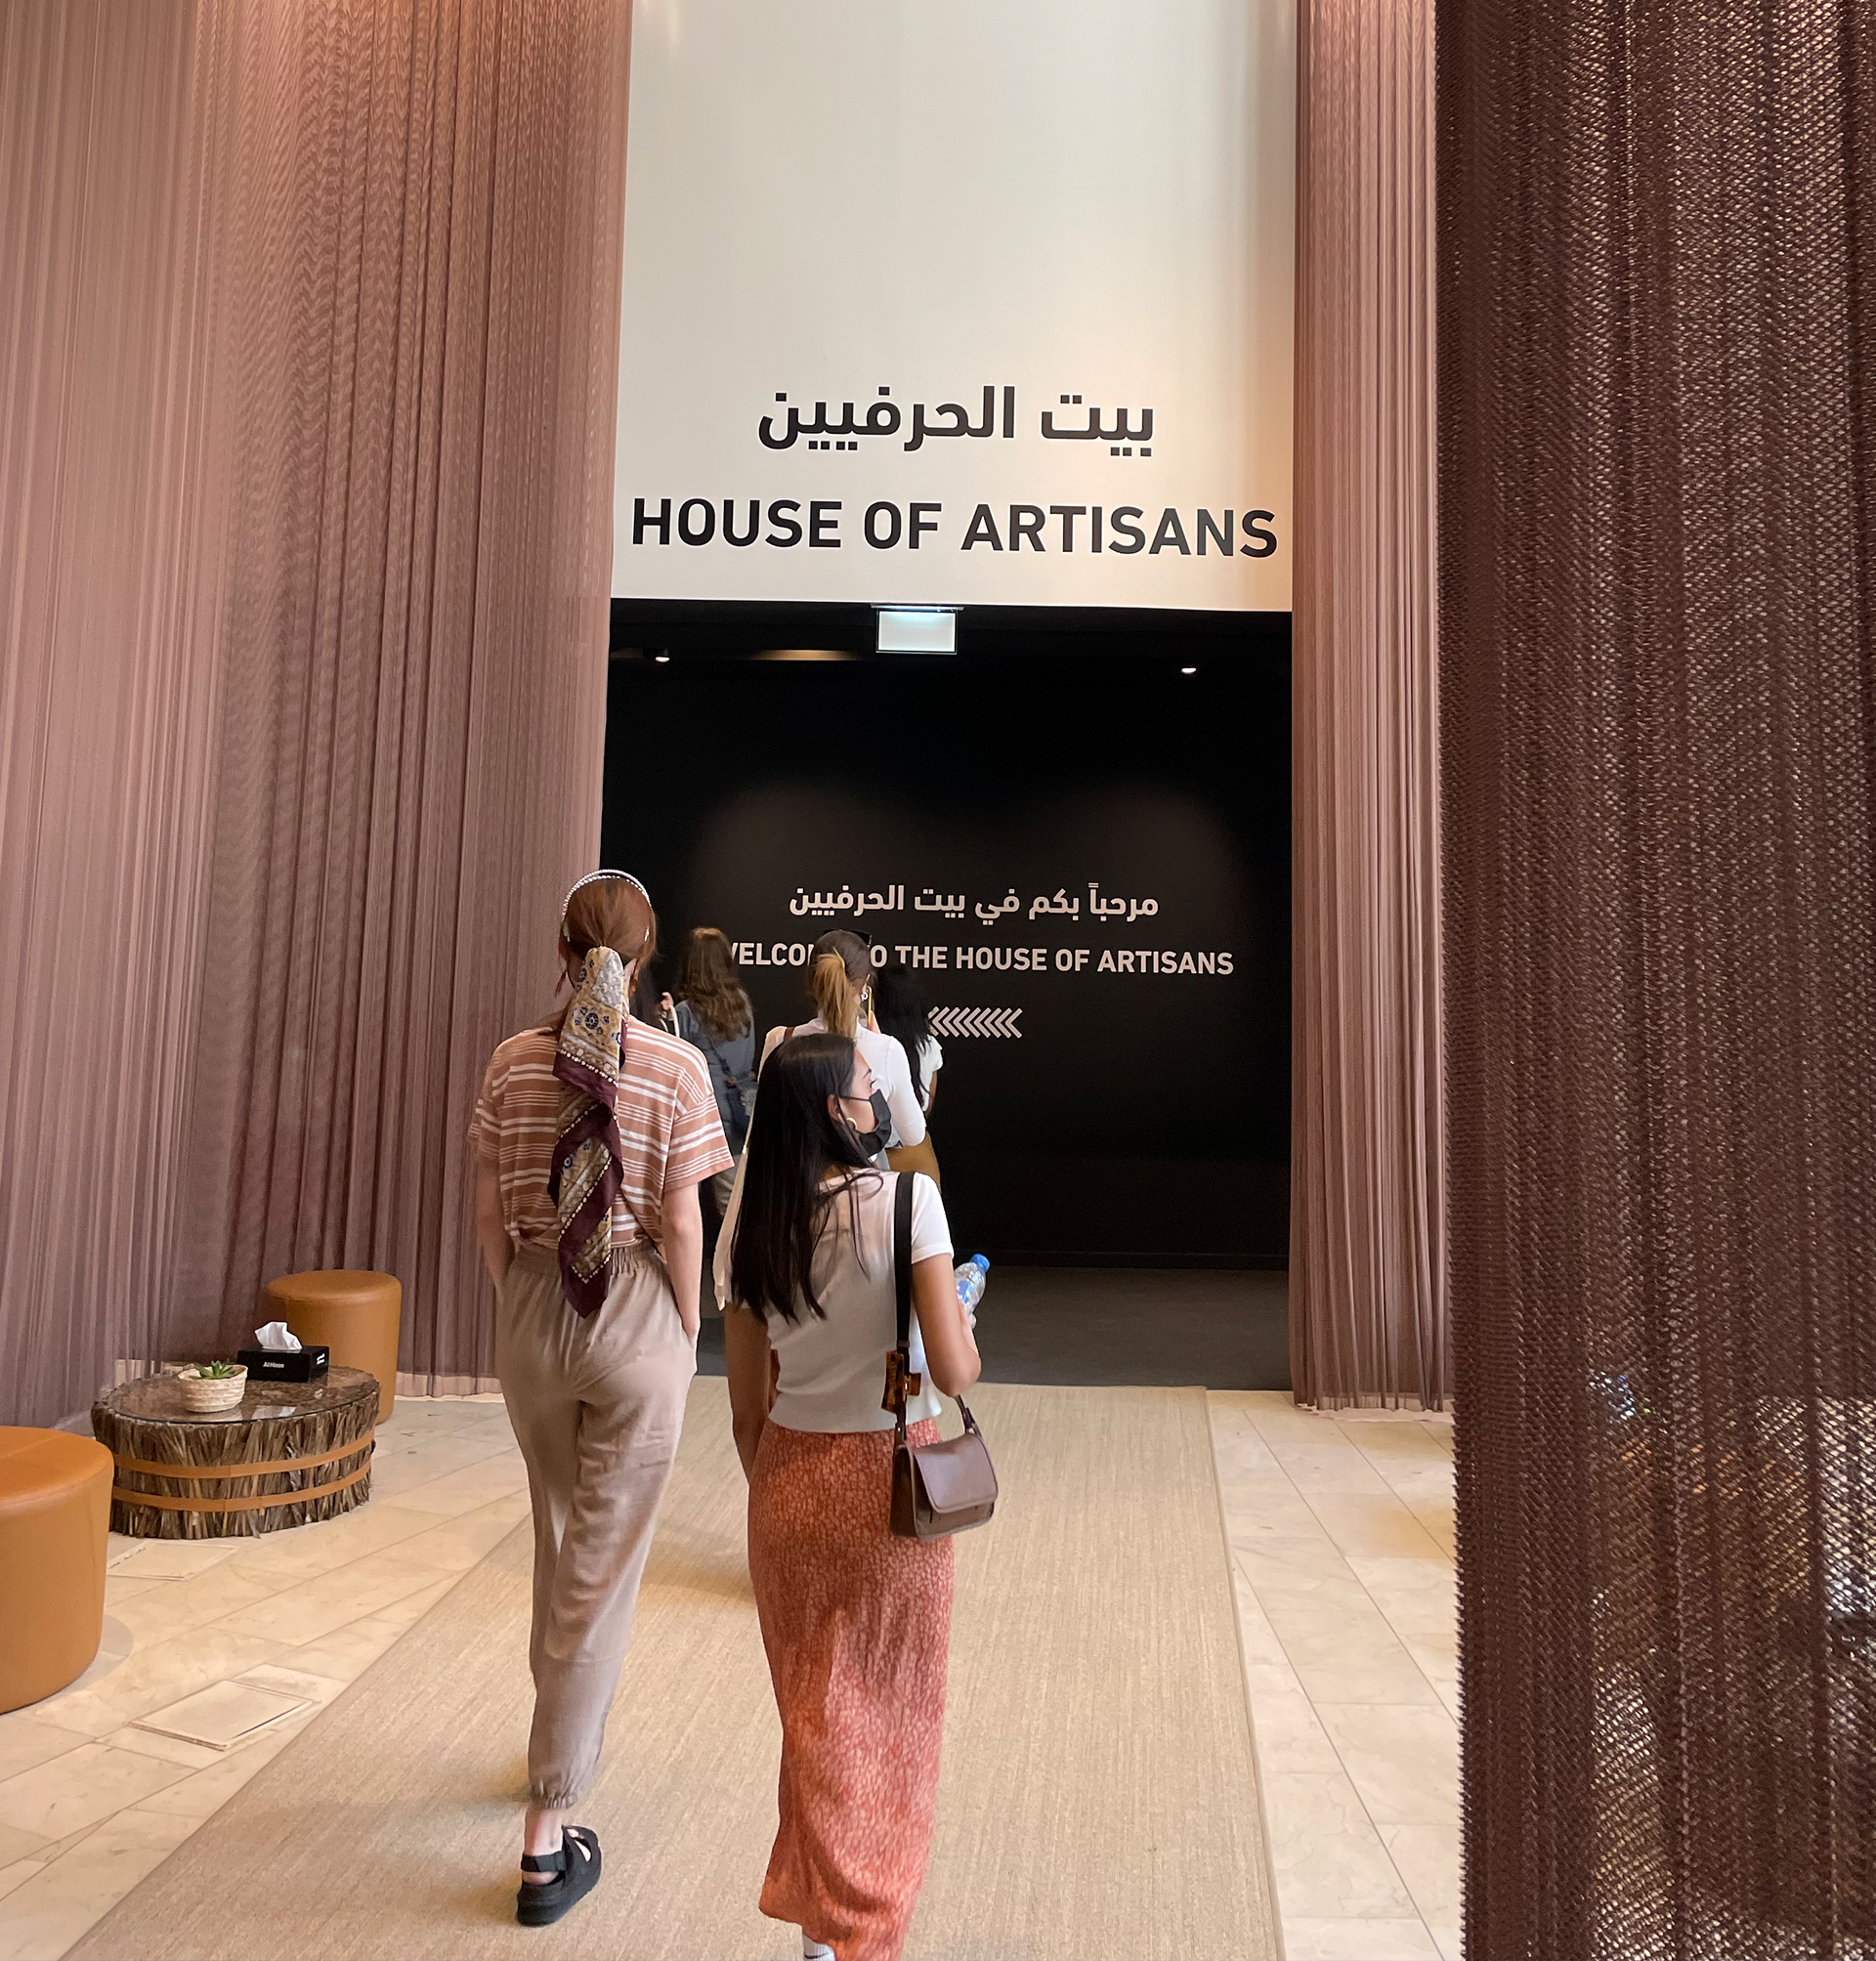 Students walking into an exhibit at the Louvre in Abu Dhabi.